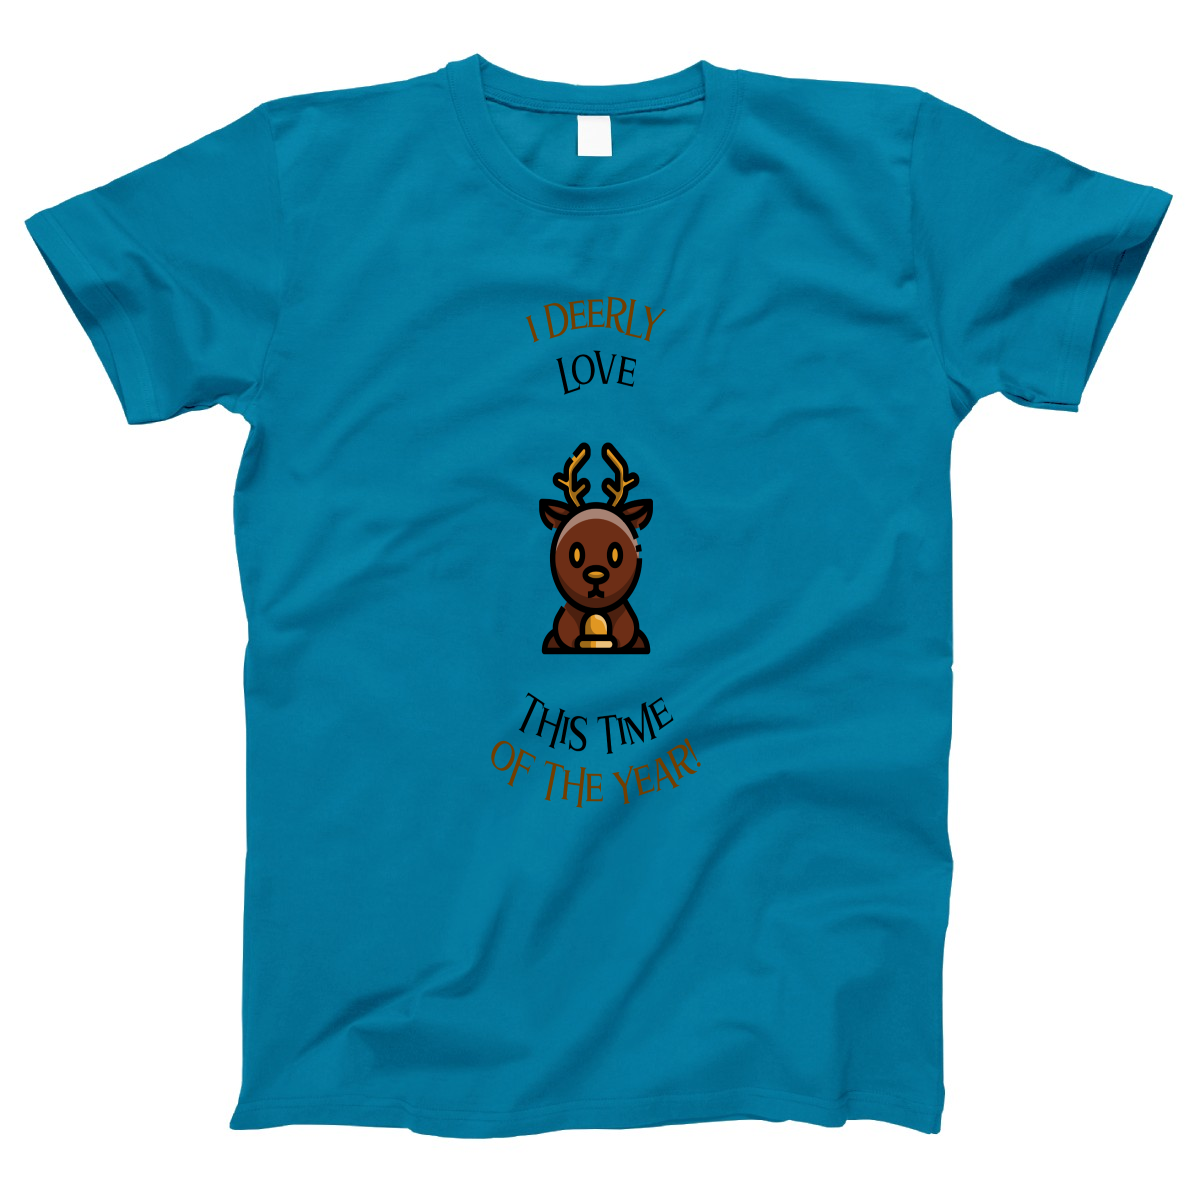 I Deerly Love This Time of the Year! Women's T-shirt | Turquoise